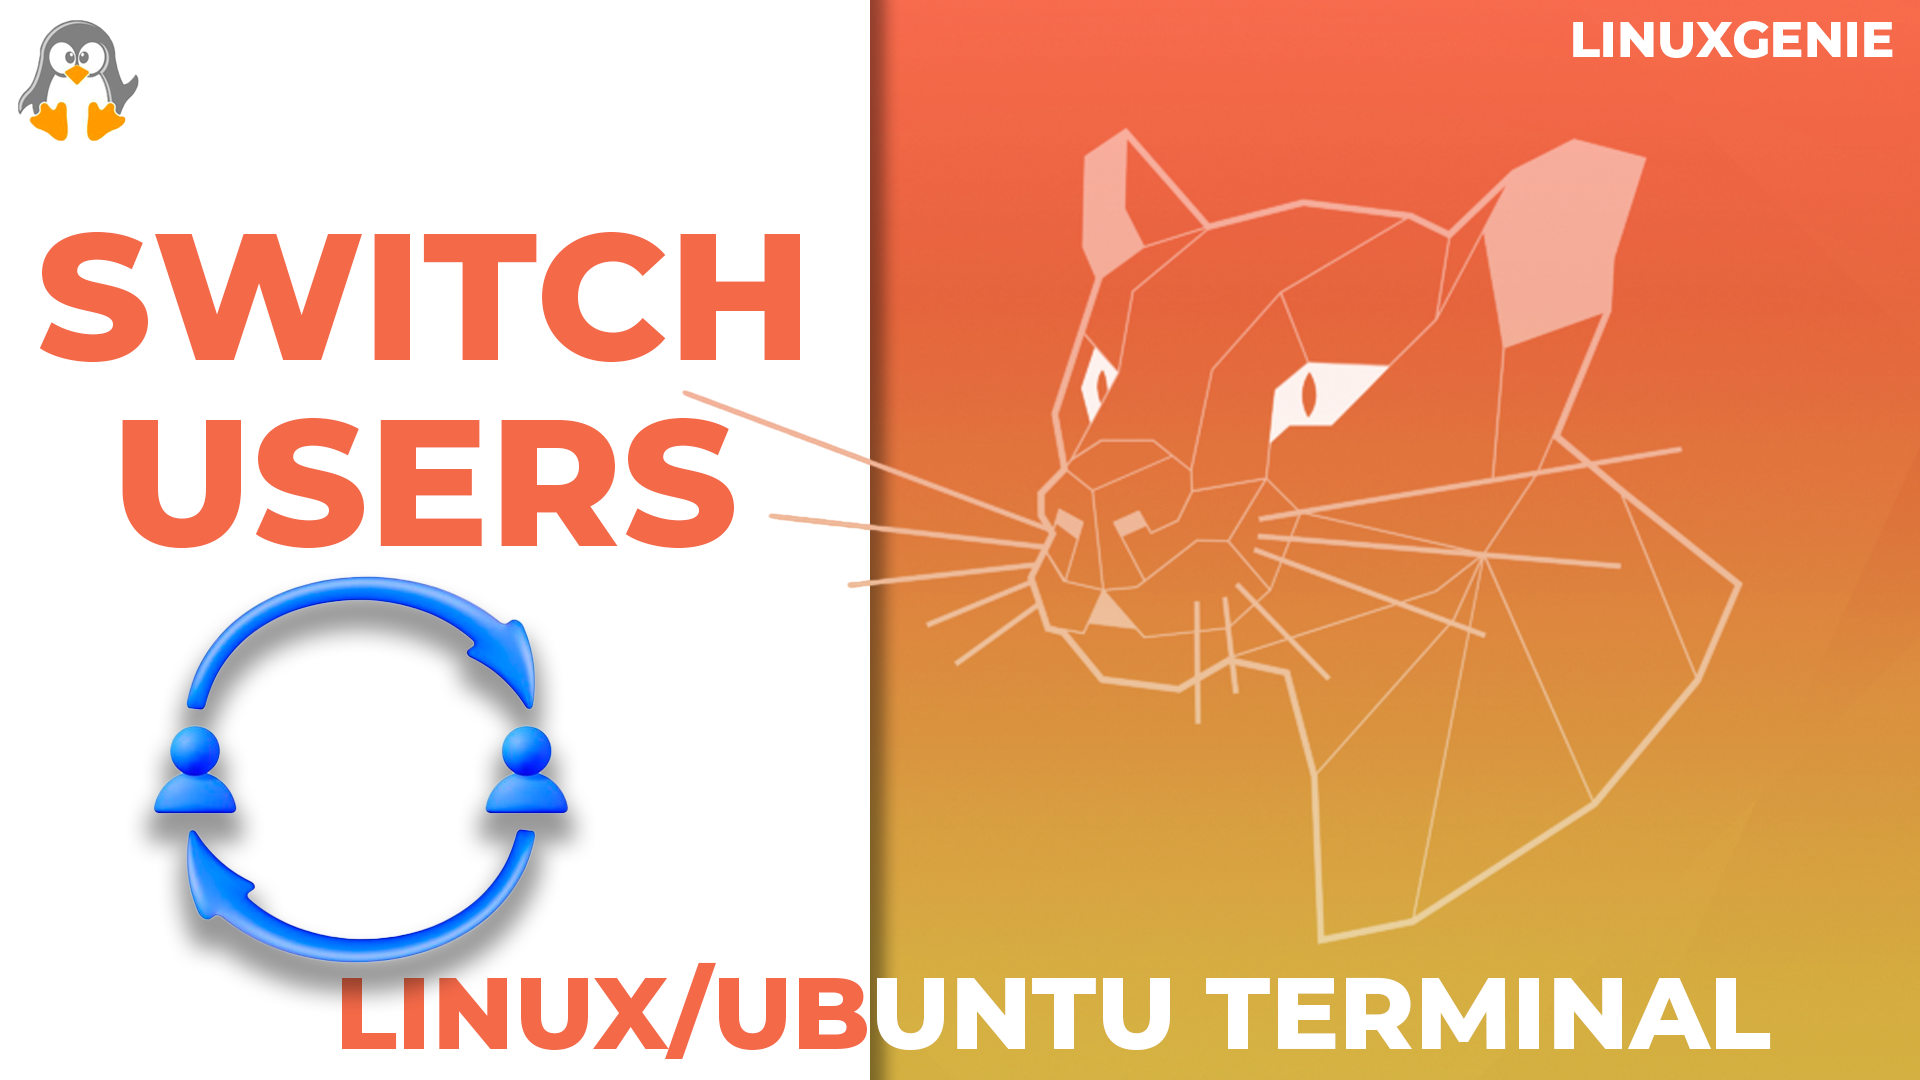 How to Switch Users in Linux/Ubuntu Terminal?